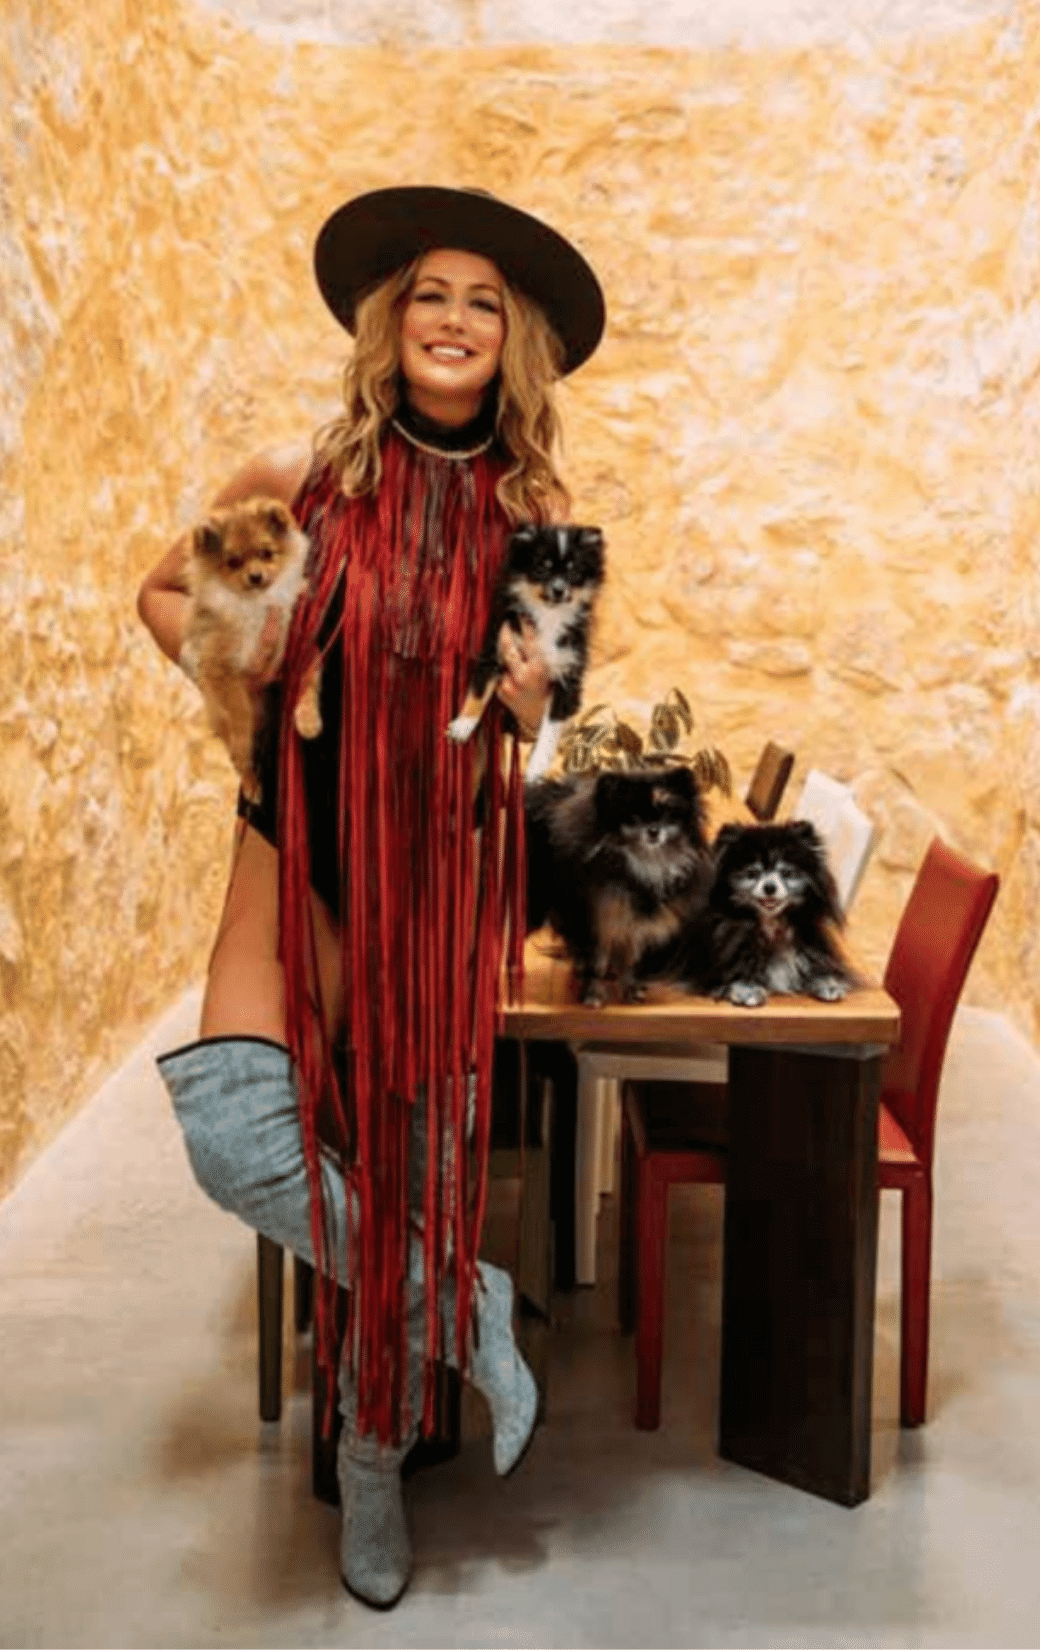 Karena with 4 Pomeranians in her home